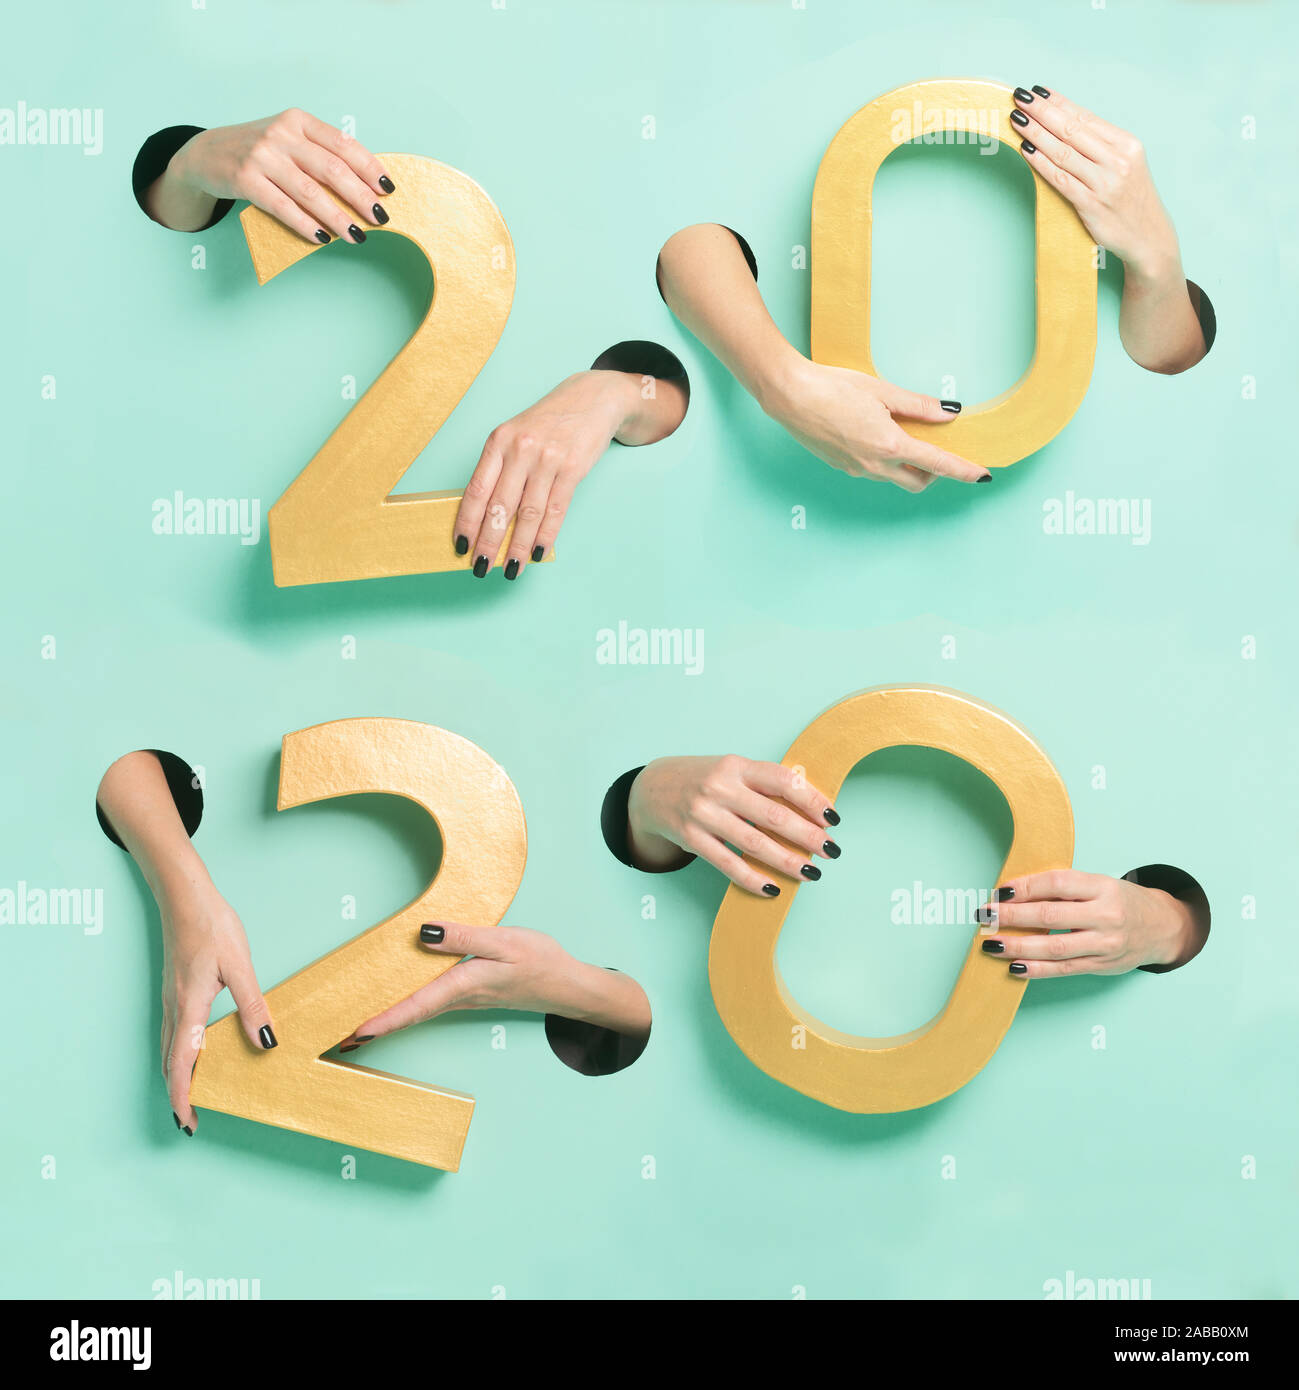 Female hands hold golden new year 2020 digits through a hole on neon mint background. Stock Photo